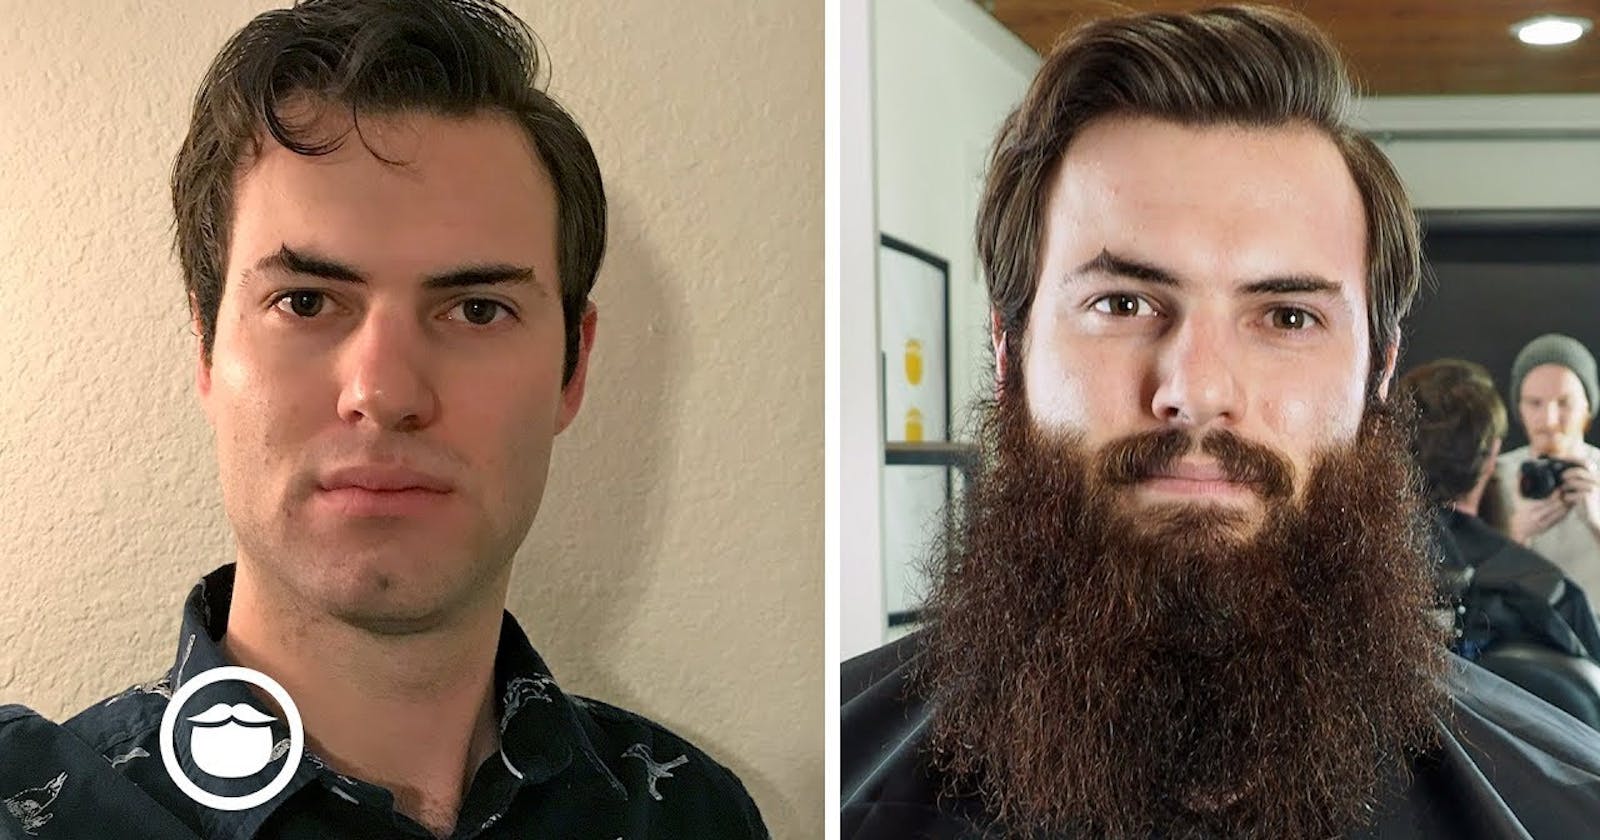 Beard Challenges: Growing, Maintaining, and Overcoming Obstacles